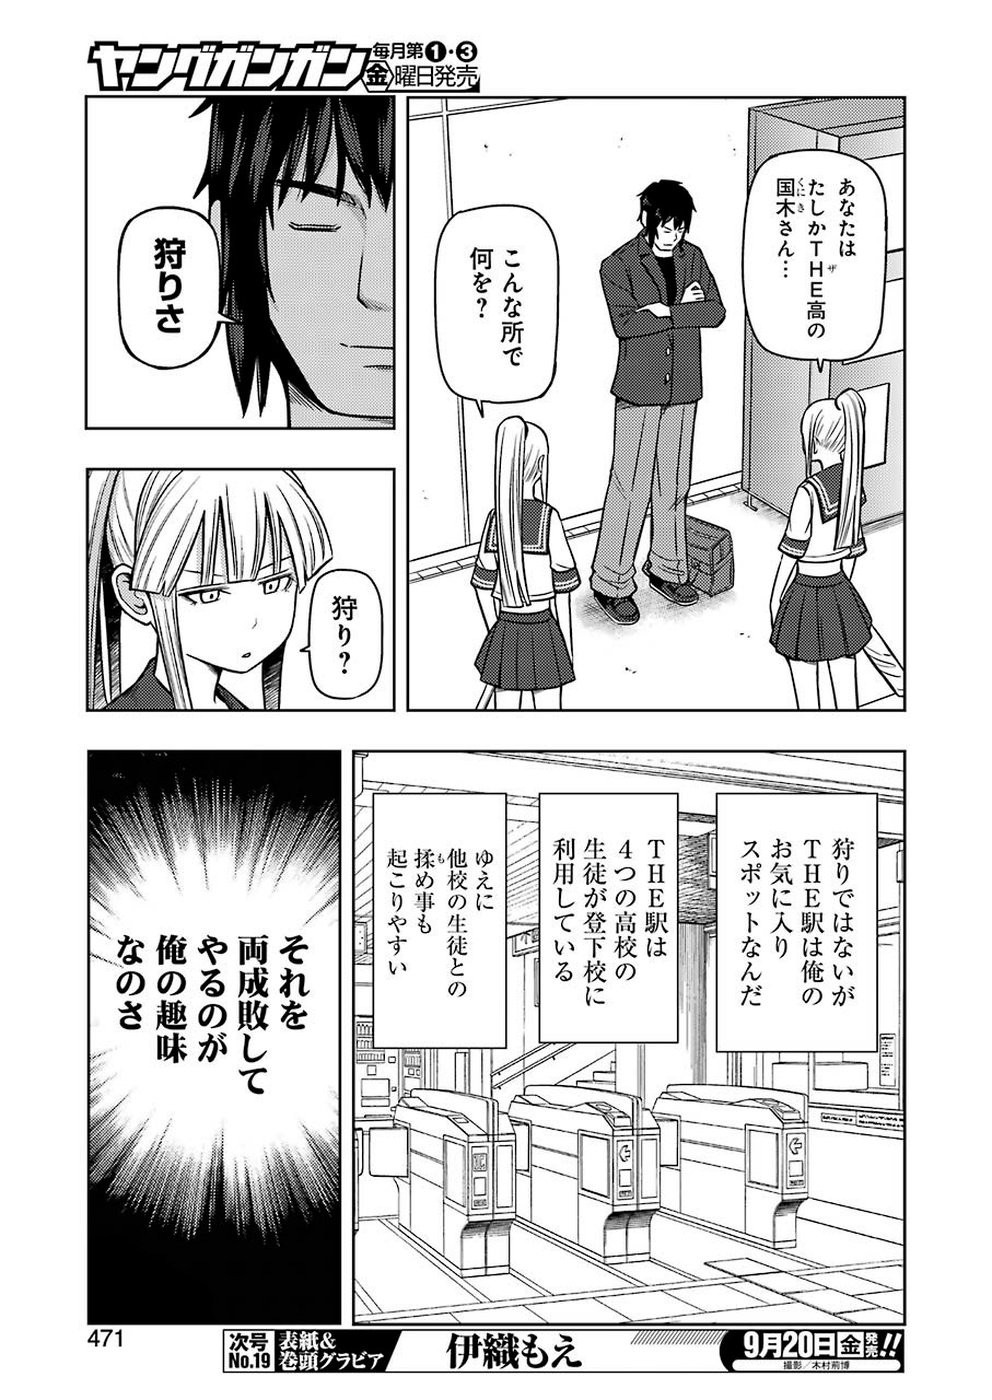 + Tic Nee-san - Chapter 190 - Page 3